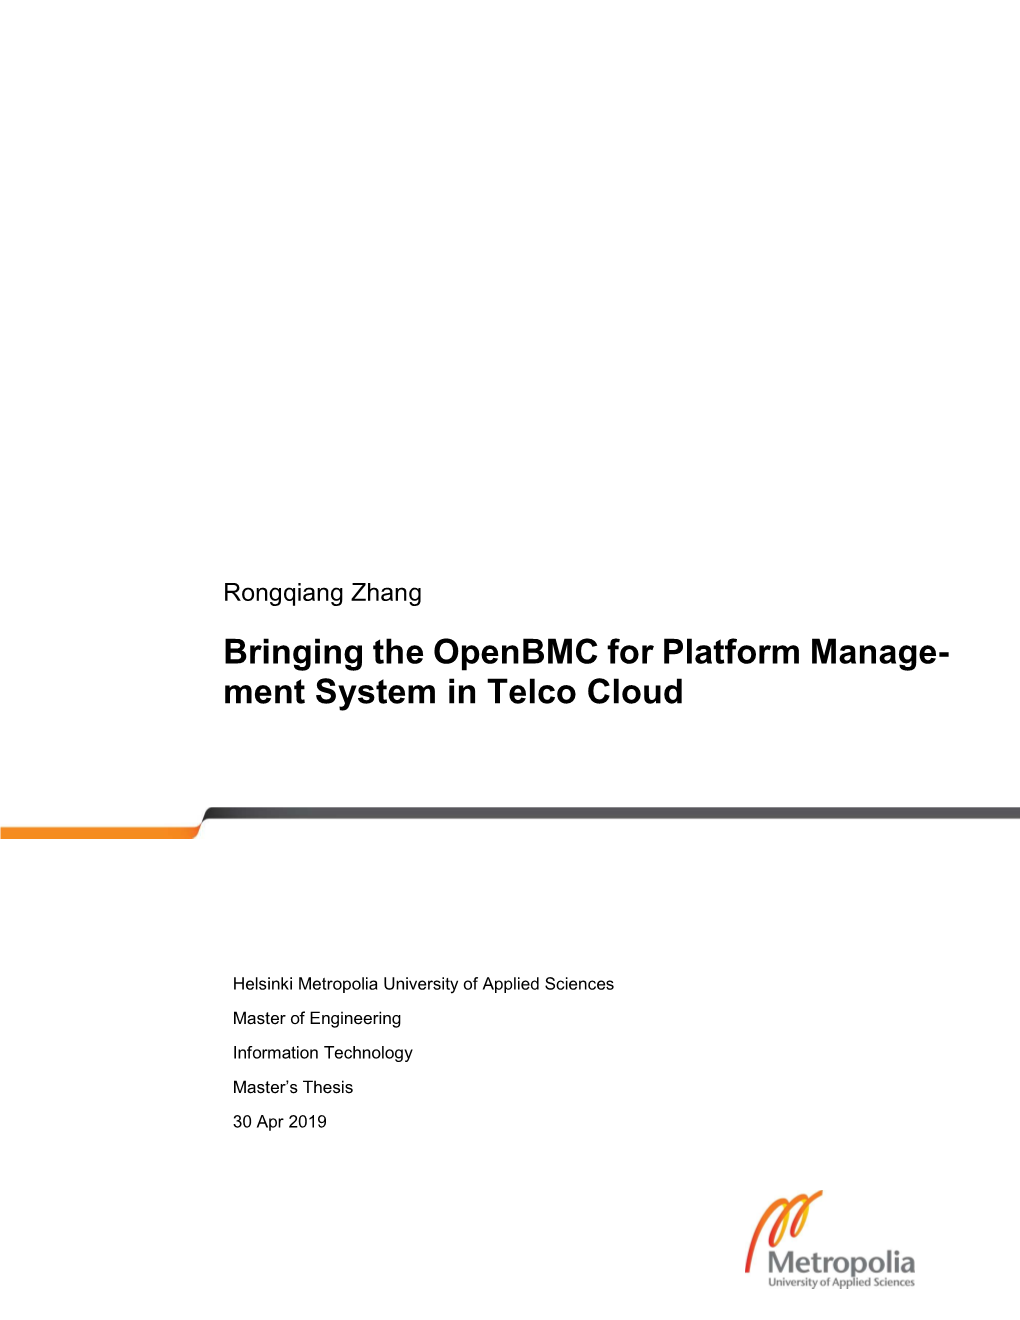 Bringing the Openbmc for Platform Manage- Ment System in Telco Cloud